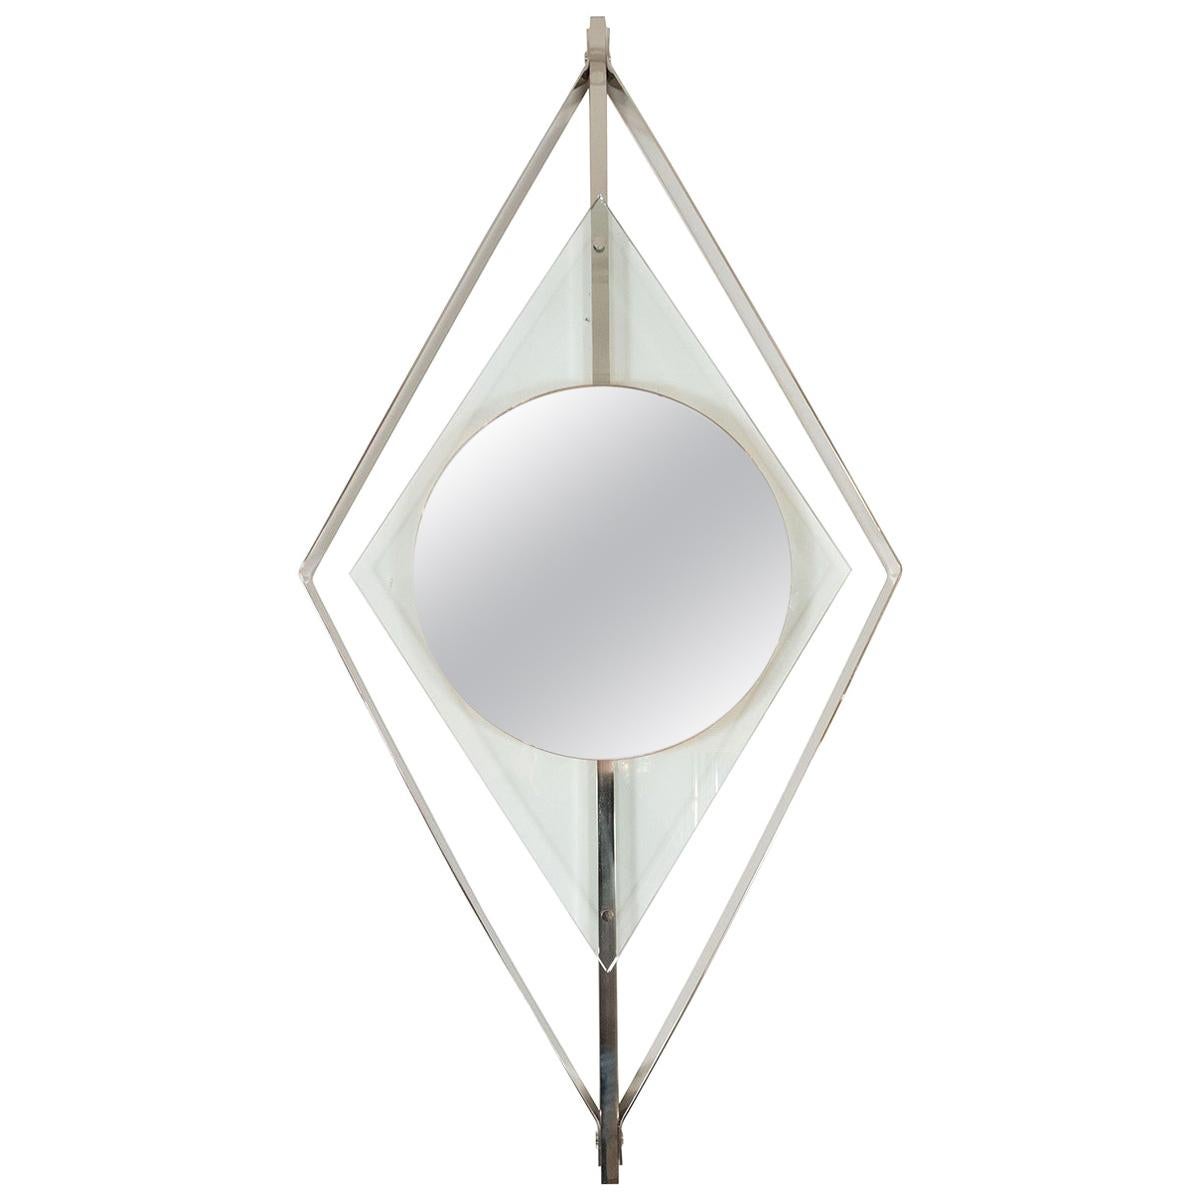 Diamond-Shaped Floating Surround Mirror For Sale